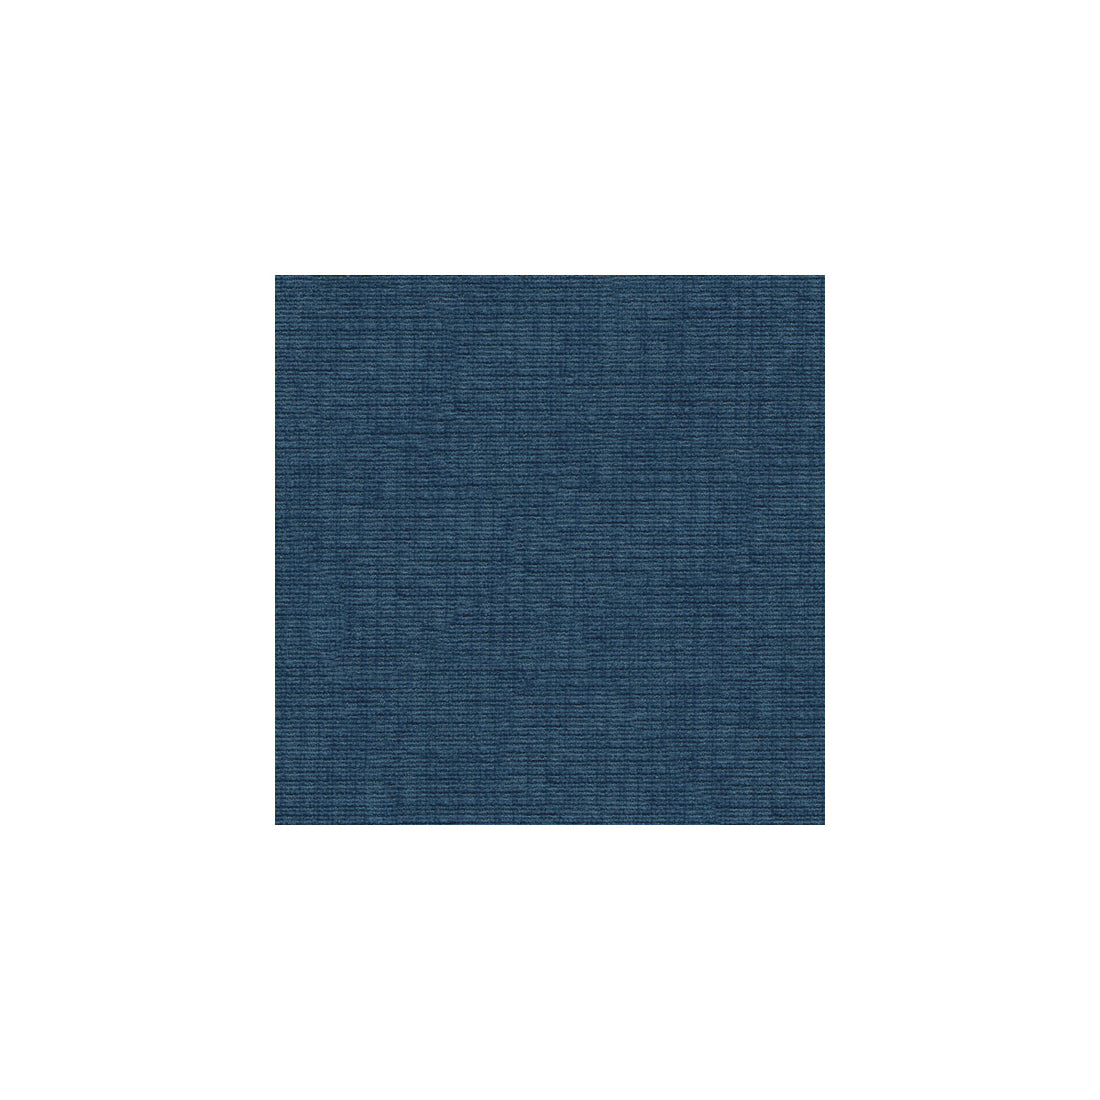 Kravet Basics fabric in 32314-5 color - pattern 32314.5.0 - by Kravet Basics in the Perfect Plains collection